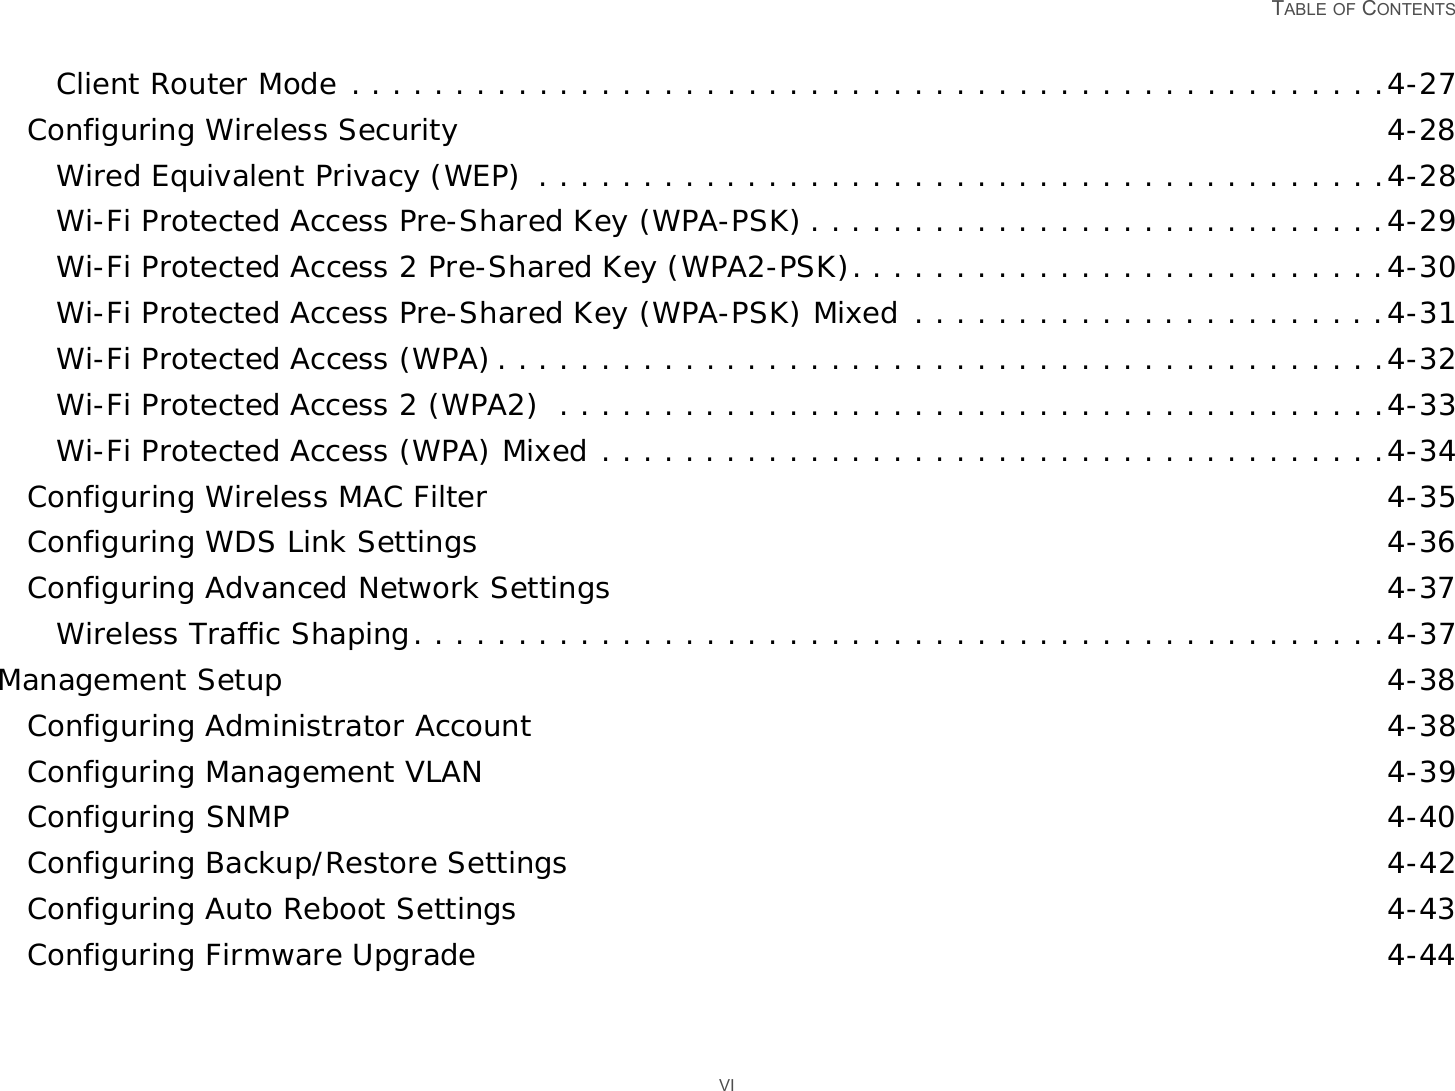   TABLE OF CONTENTS VIClient Router Mode . . . . . . . . . . . . . . . . . . . . . . . . . . . . . . . . . . . . . . . . . . . . . . . . . .4-27Configuring Wireless Security 4-28Wired Equivalent Privacy (WEP)  . . . . . . . . . . . . . . . . . . . . . . . . . . . . . . . . . . . . . . . . .4-28Wi-Fi Protected Access Pre-Shared Key (WPA-PSK) . . . . . . . . . . . . . . . . . . . . . . . . . . . .4-29Wi-Fi Protected Access 2 Pre-Shared Key (WPA2-PSK). . . . . . . . . . . . . . . . . . . . . . . . . .4-30Wi-Fi Protected Access Pre-Shared Key (WPA-PSK) Mixed . . . . . . . . . . . . . . . . . . . . . . .4-31Wi-Fi Protected Access (WPA). . . . . . . . . . . . . . . . . . . . . . . . . . . . . . . . . . . . . . . . . . .4-32Wi-Fi Protected Access 2 (WPA2)  . . . . . . . . . . . . . . . . . . . . . . . . . . . . . . . . . . . . . . . .4-33Wi-Fi Protected Access (WPA) Mixed . . . . . . . . . . . . . . . . . . . . . . . . . . . . . . . . . . . . . .4-34Configuring Wireless MAC Filter 4-35Configuring WDS Link Settings 4-36Configuring Advanced Network Settings 4-37Wireless Traffic Shaping. . . . . . . . . . . . . . . . . . . . . . . . . . . . . . . . . . . . . . . . . . . . . . .4-37Management Setup 4-38Configuring Administrator Account 4-38Configuring Management VLAN 4-39Configuring SNMP 4-40Configuring Backup/Restore Settings 4-42Configuring Auto Reboot Settings 4-43Configuring Firmware Upgrade 4-44